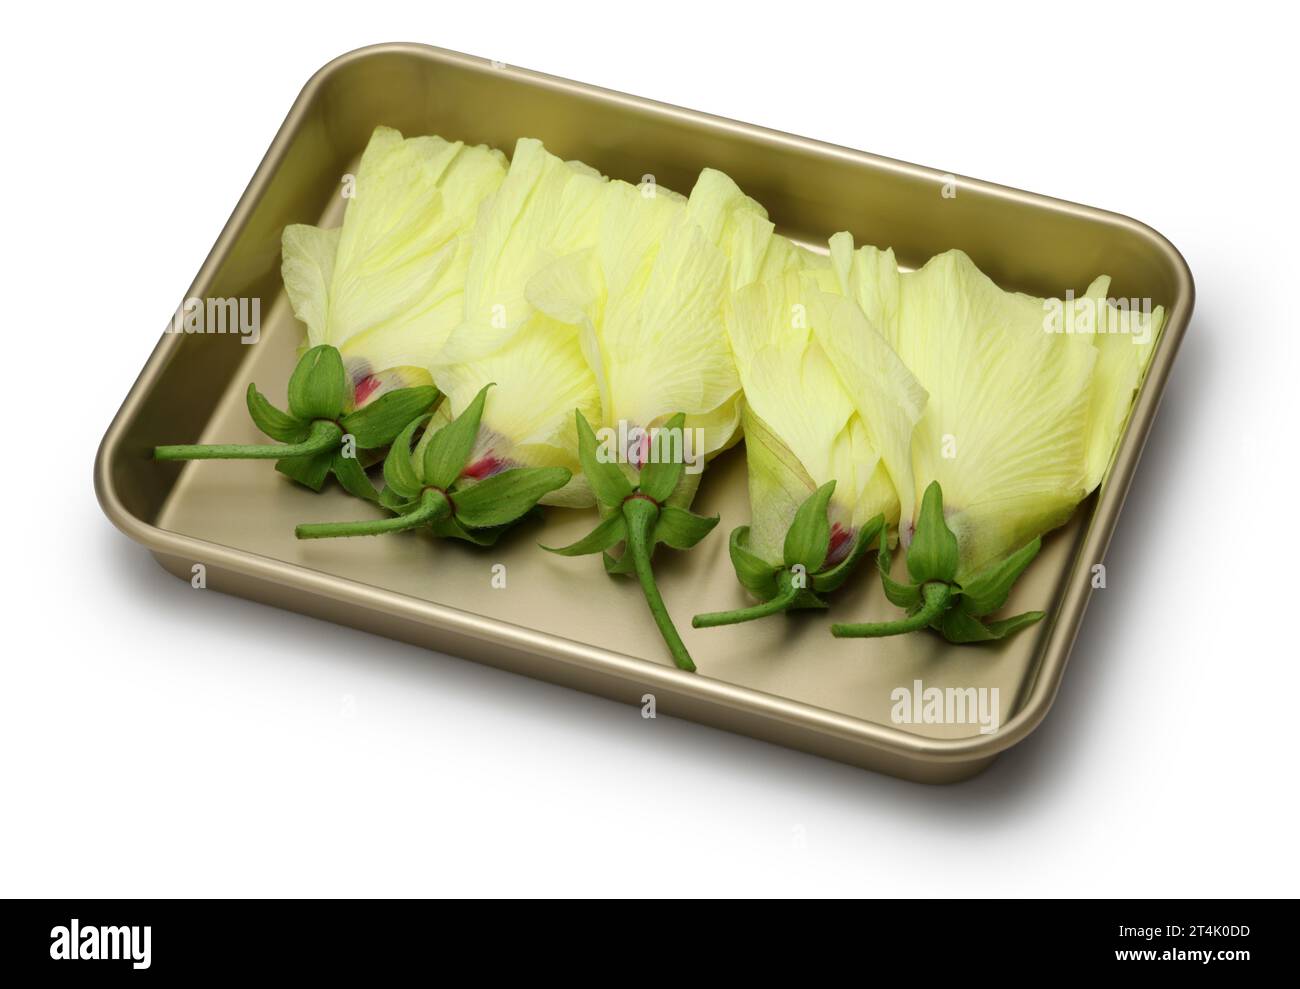 Aibika, edible okra flowers in a tray Stock Photo